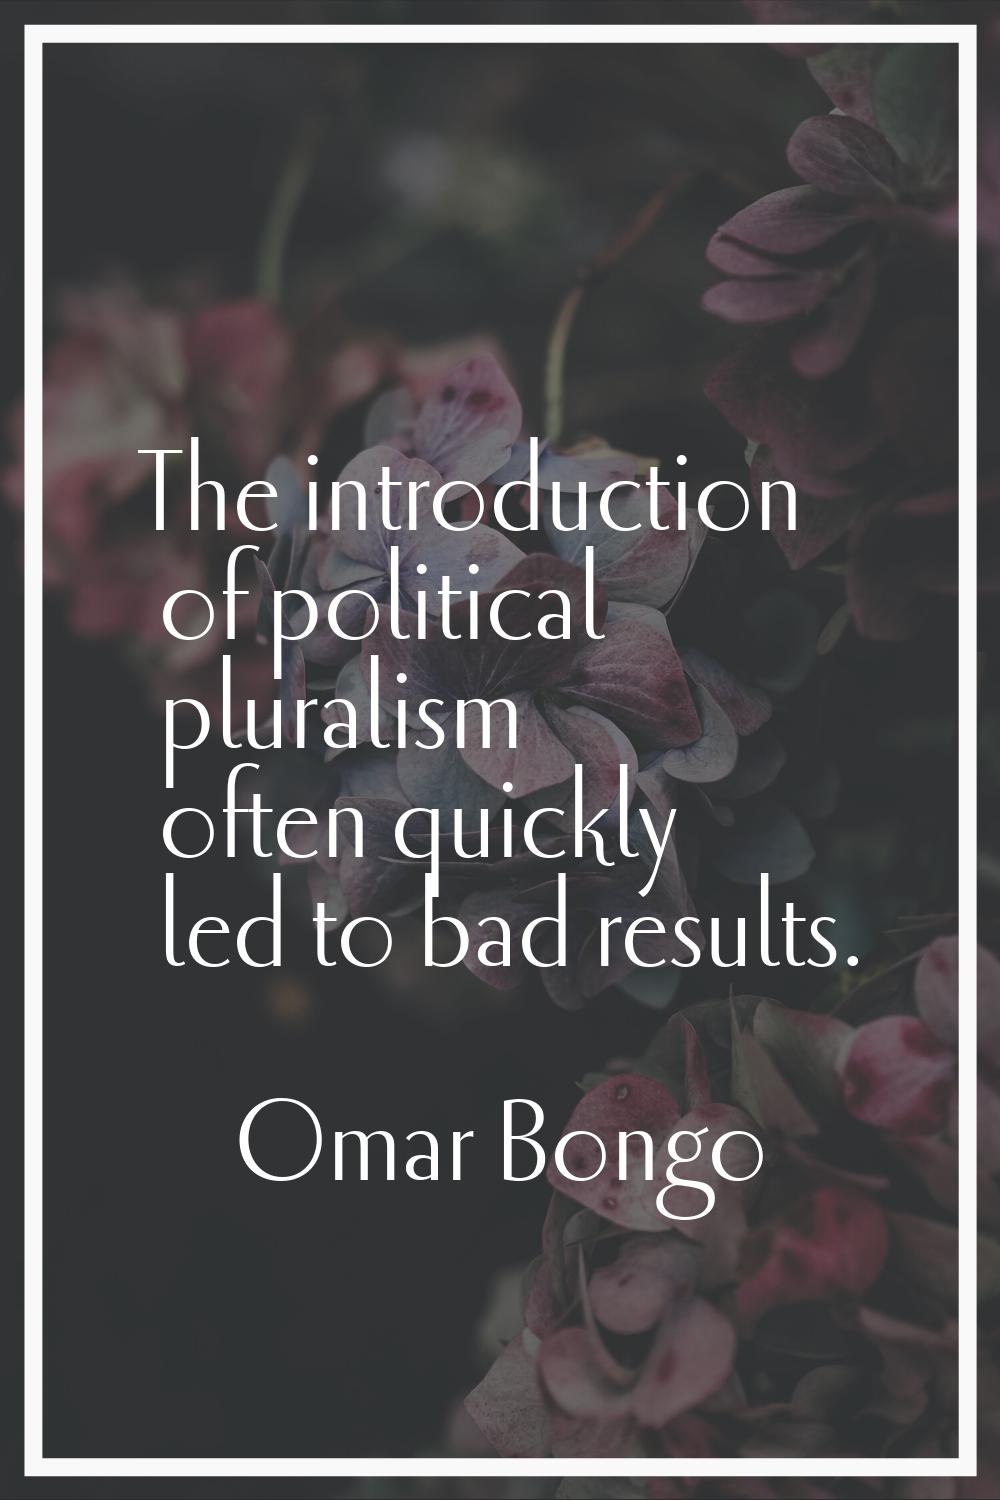 The introduction of political pluralism often quickly led to bad results.